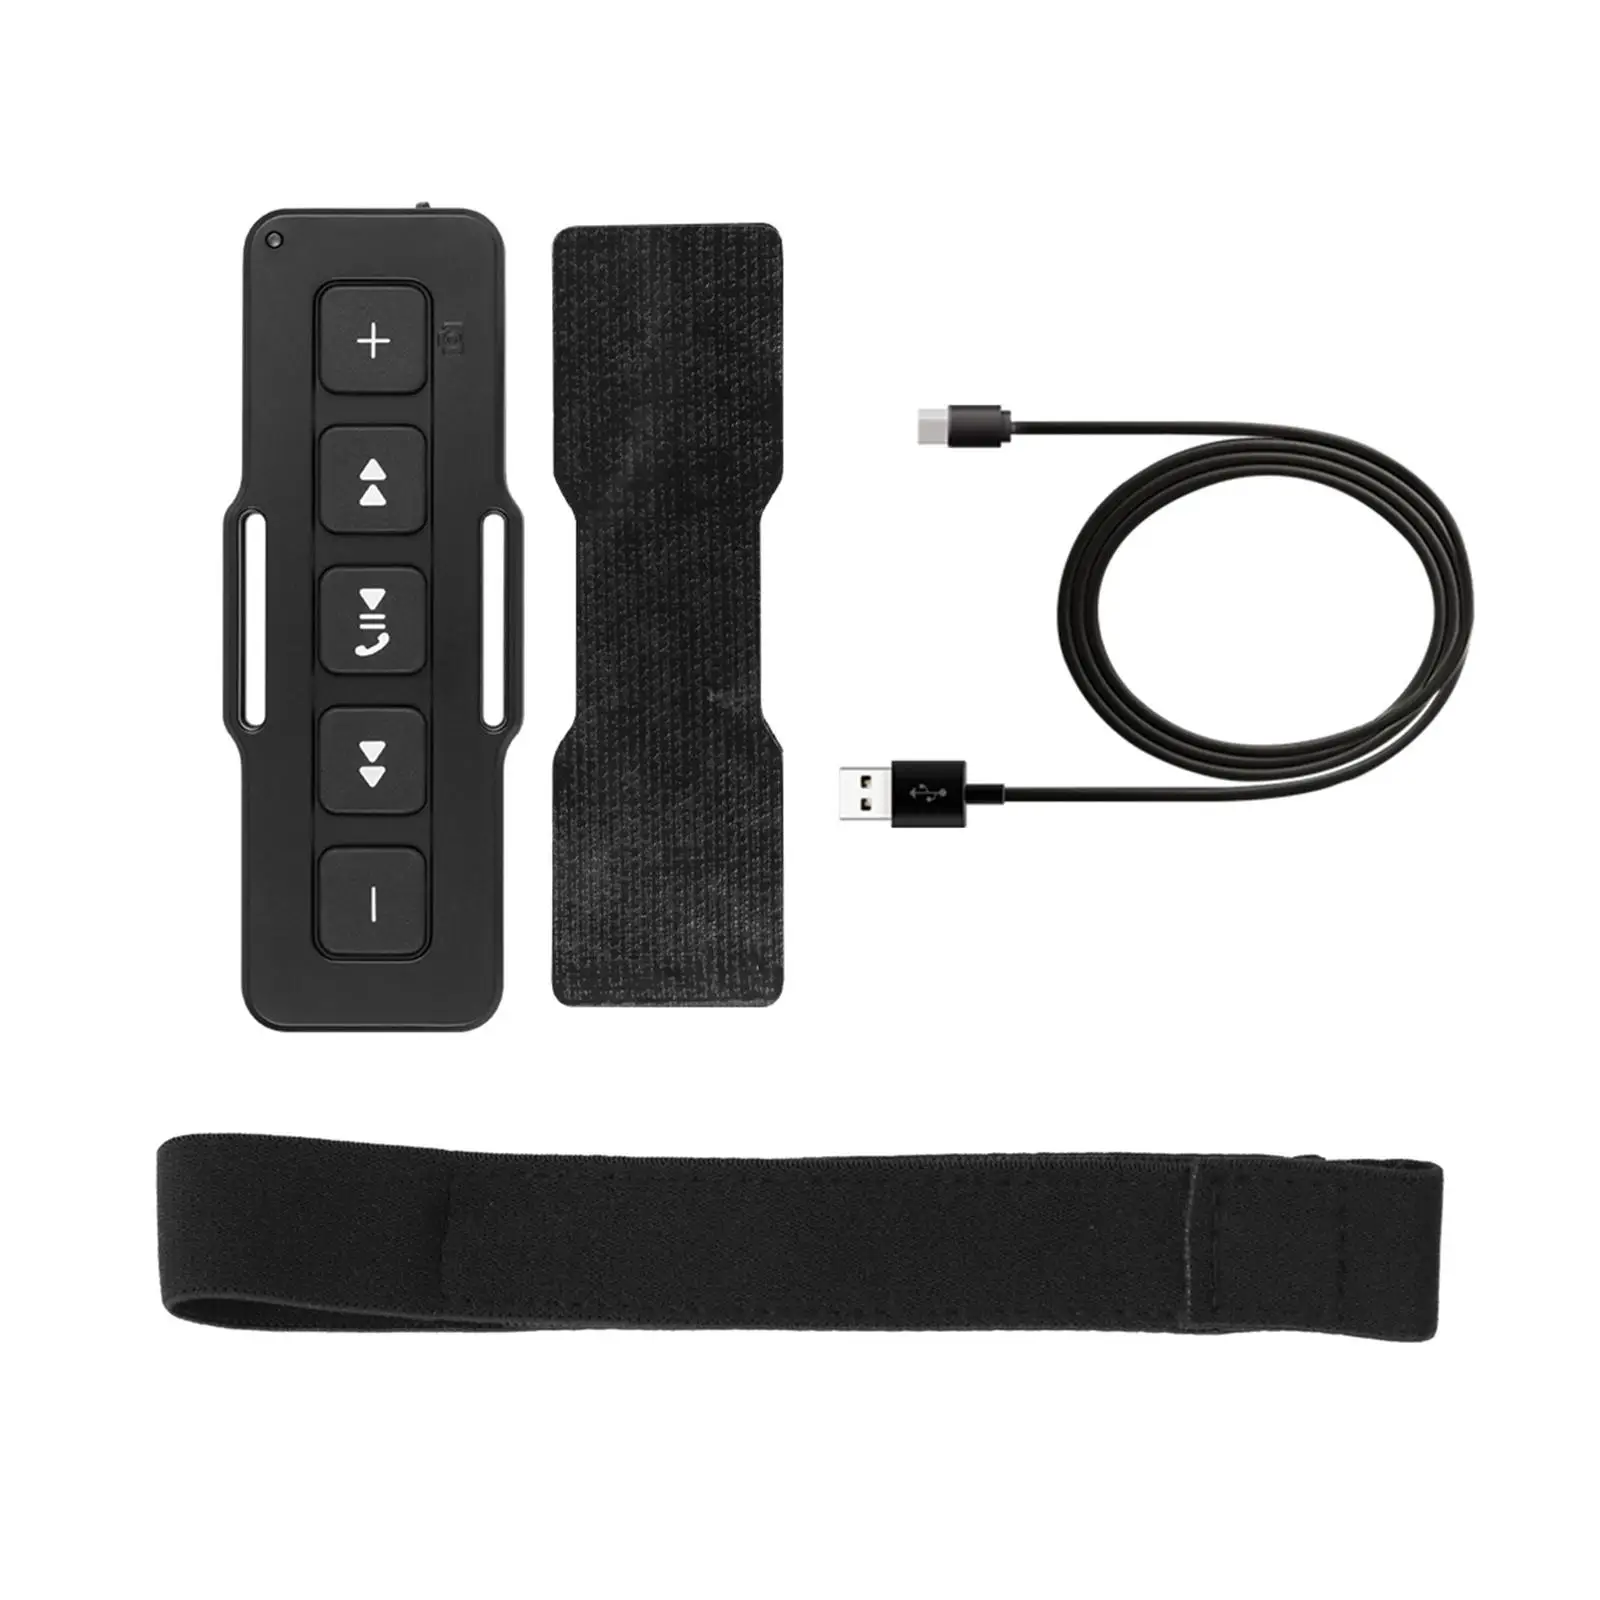 with Elastic Band Car Remote Controller 5 Button IPX4 Durable Portable Adjustable Music Control Media Control for Skiing